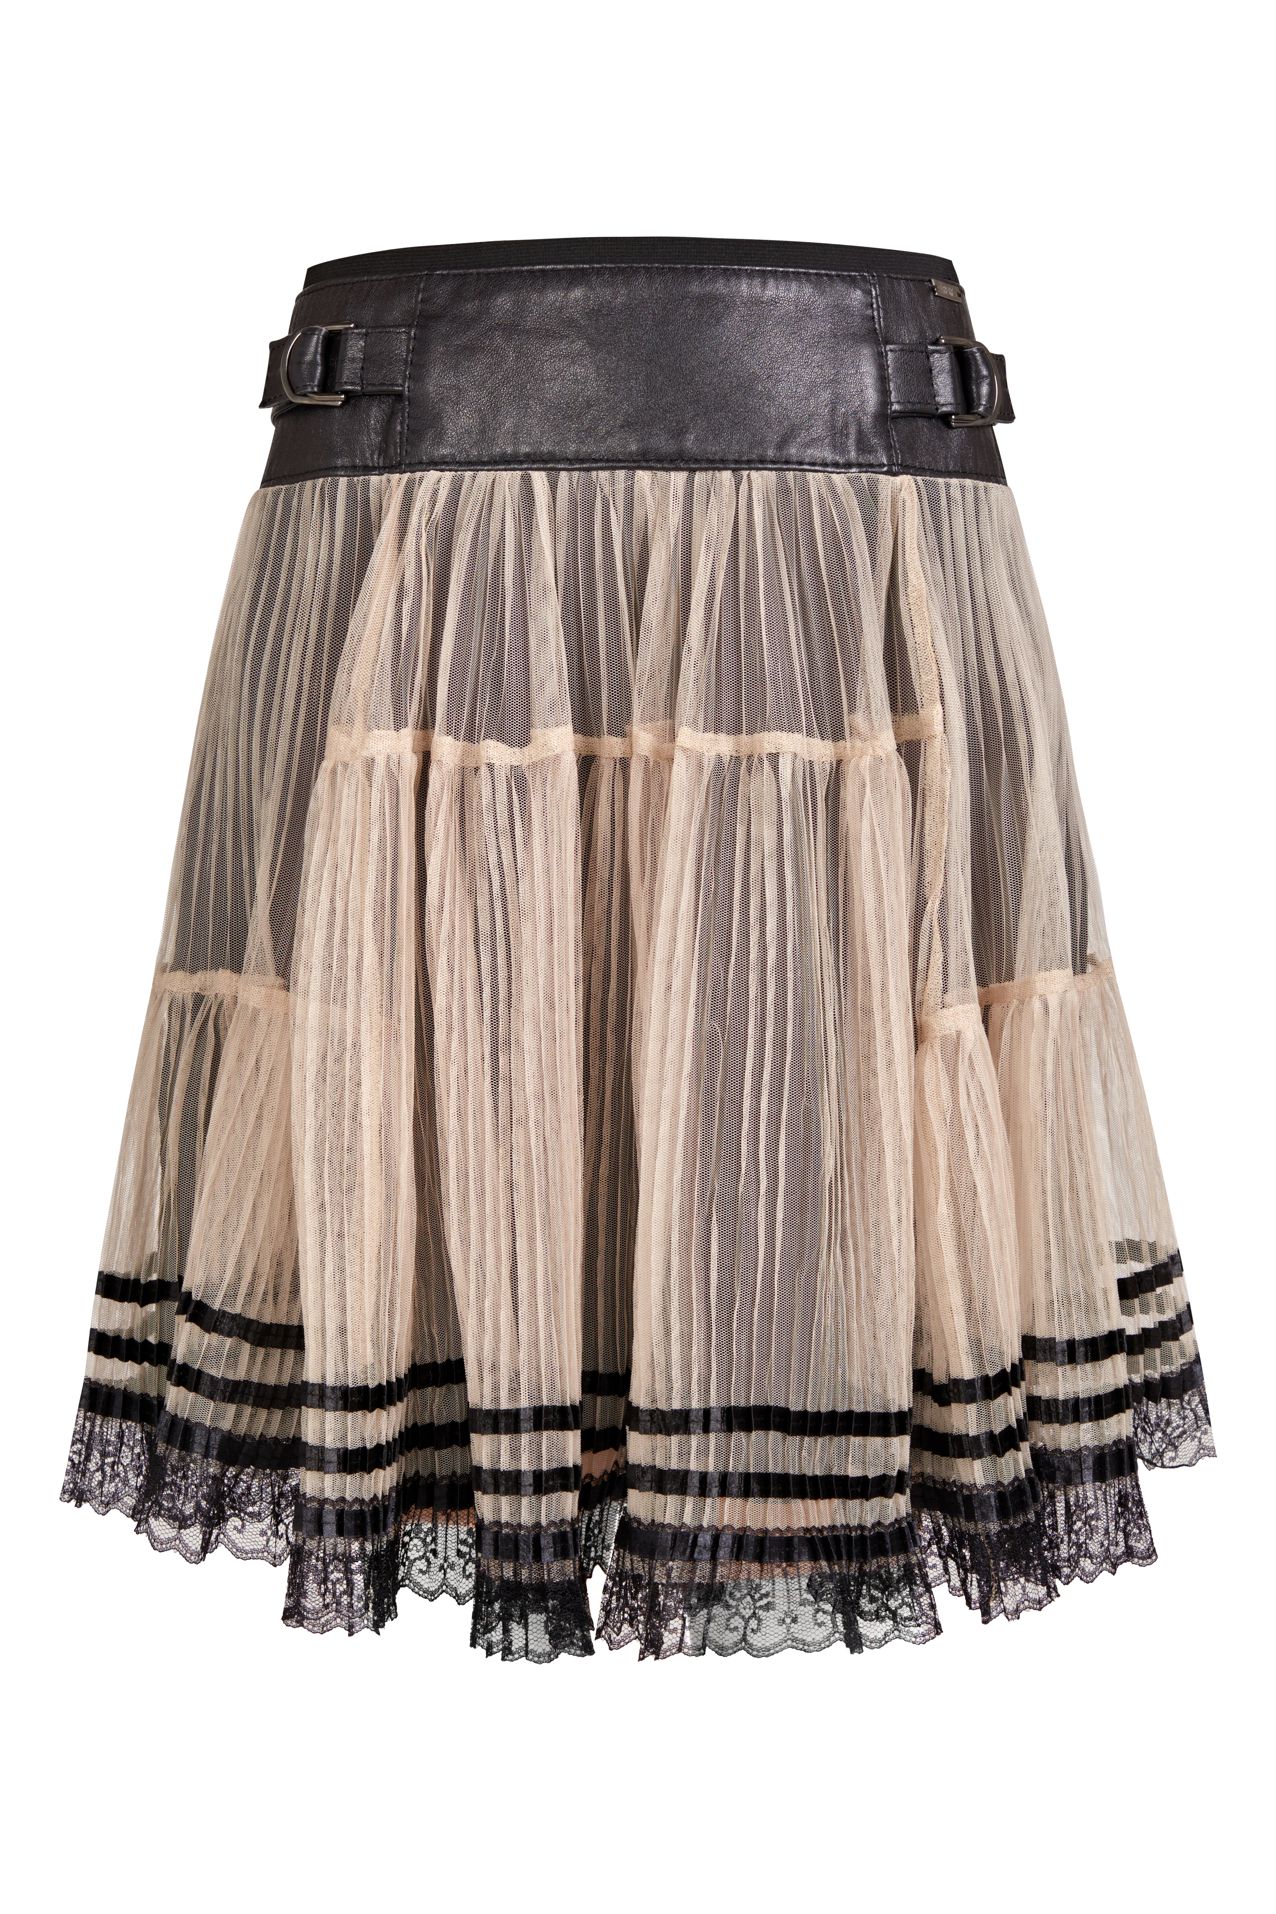 tulle and leather skirt, tulle skirt with leather yoke and belt, skirt with yoke and Italian leather strap, skirt with yoke of natural leather and tulle, ecru skirt with natural  black leather yoke, skirt polish brand, made in poland skirt